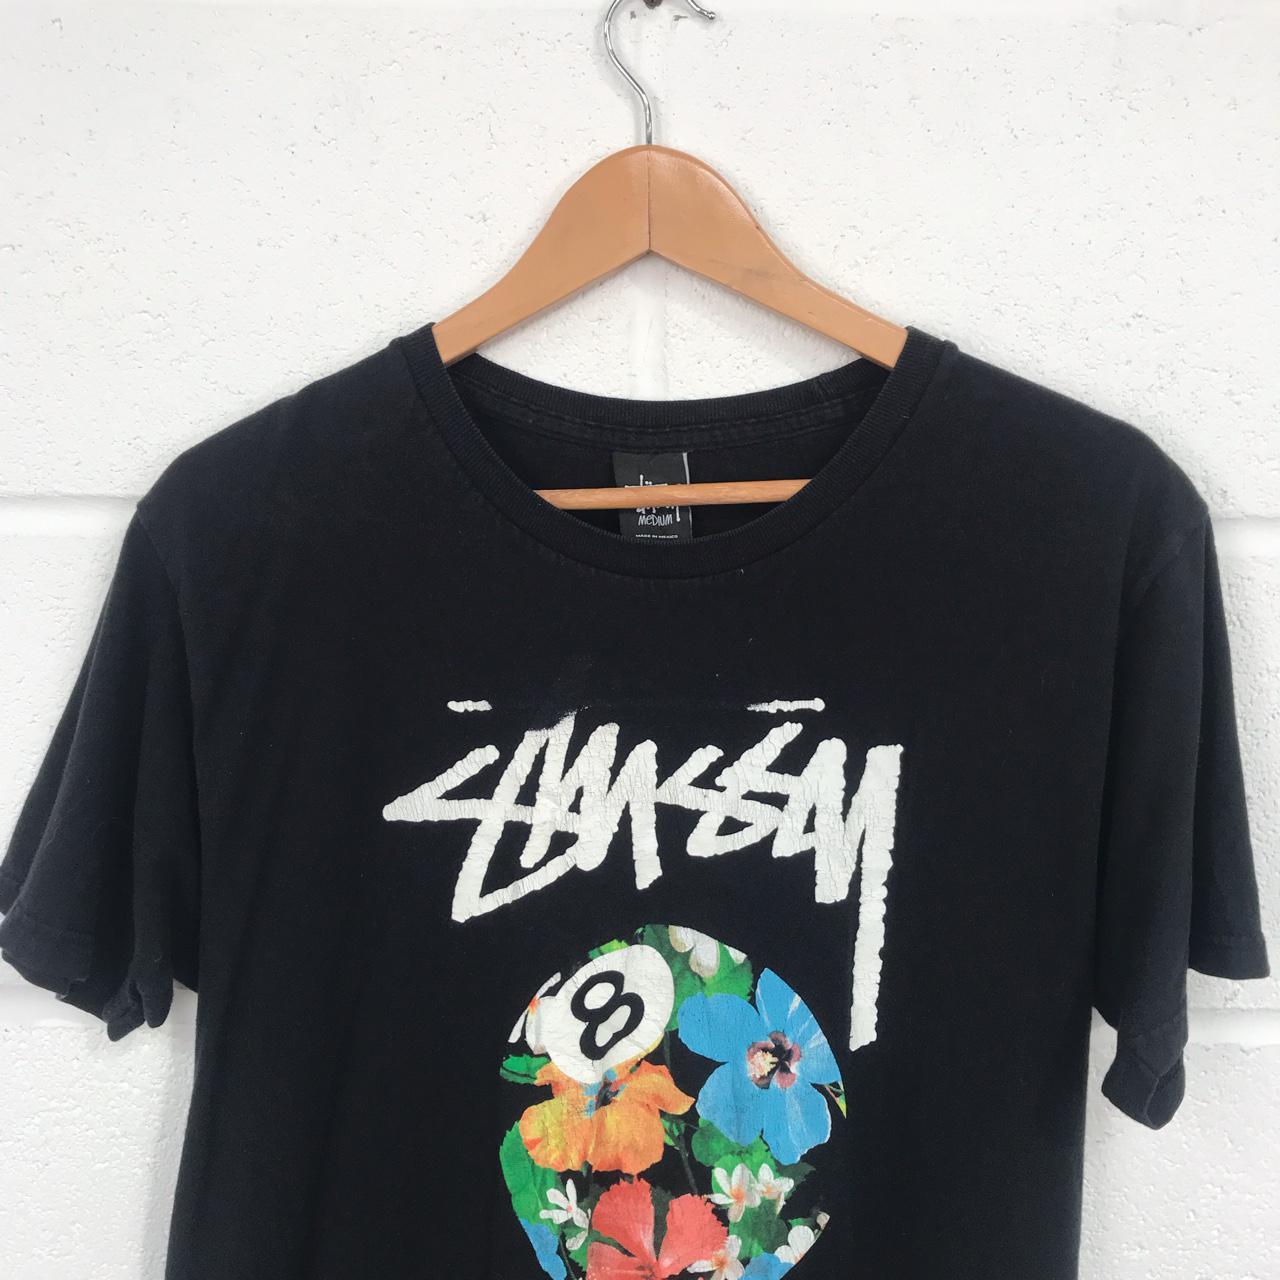 Product Image 2 - Stussy Graphic spellout T-shirt Tee

FREE